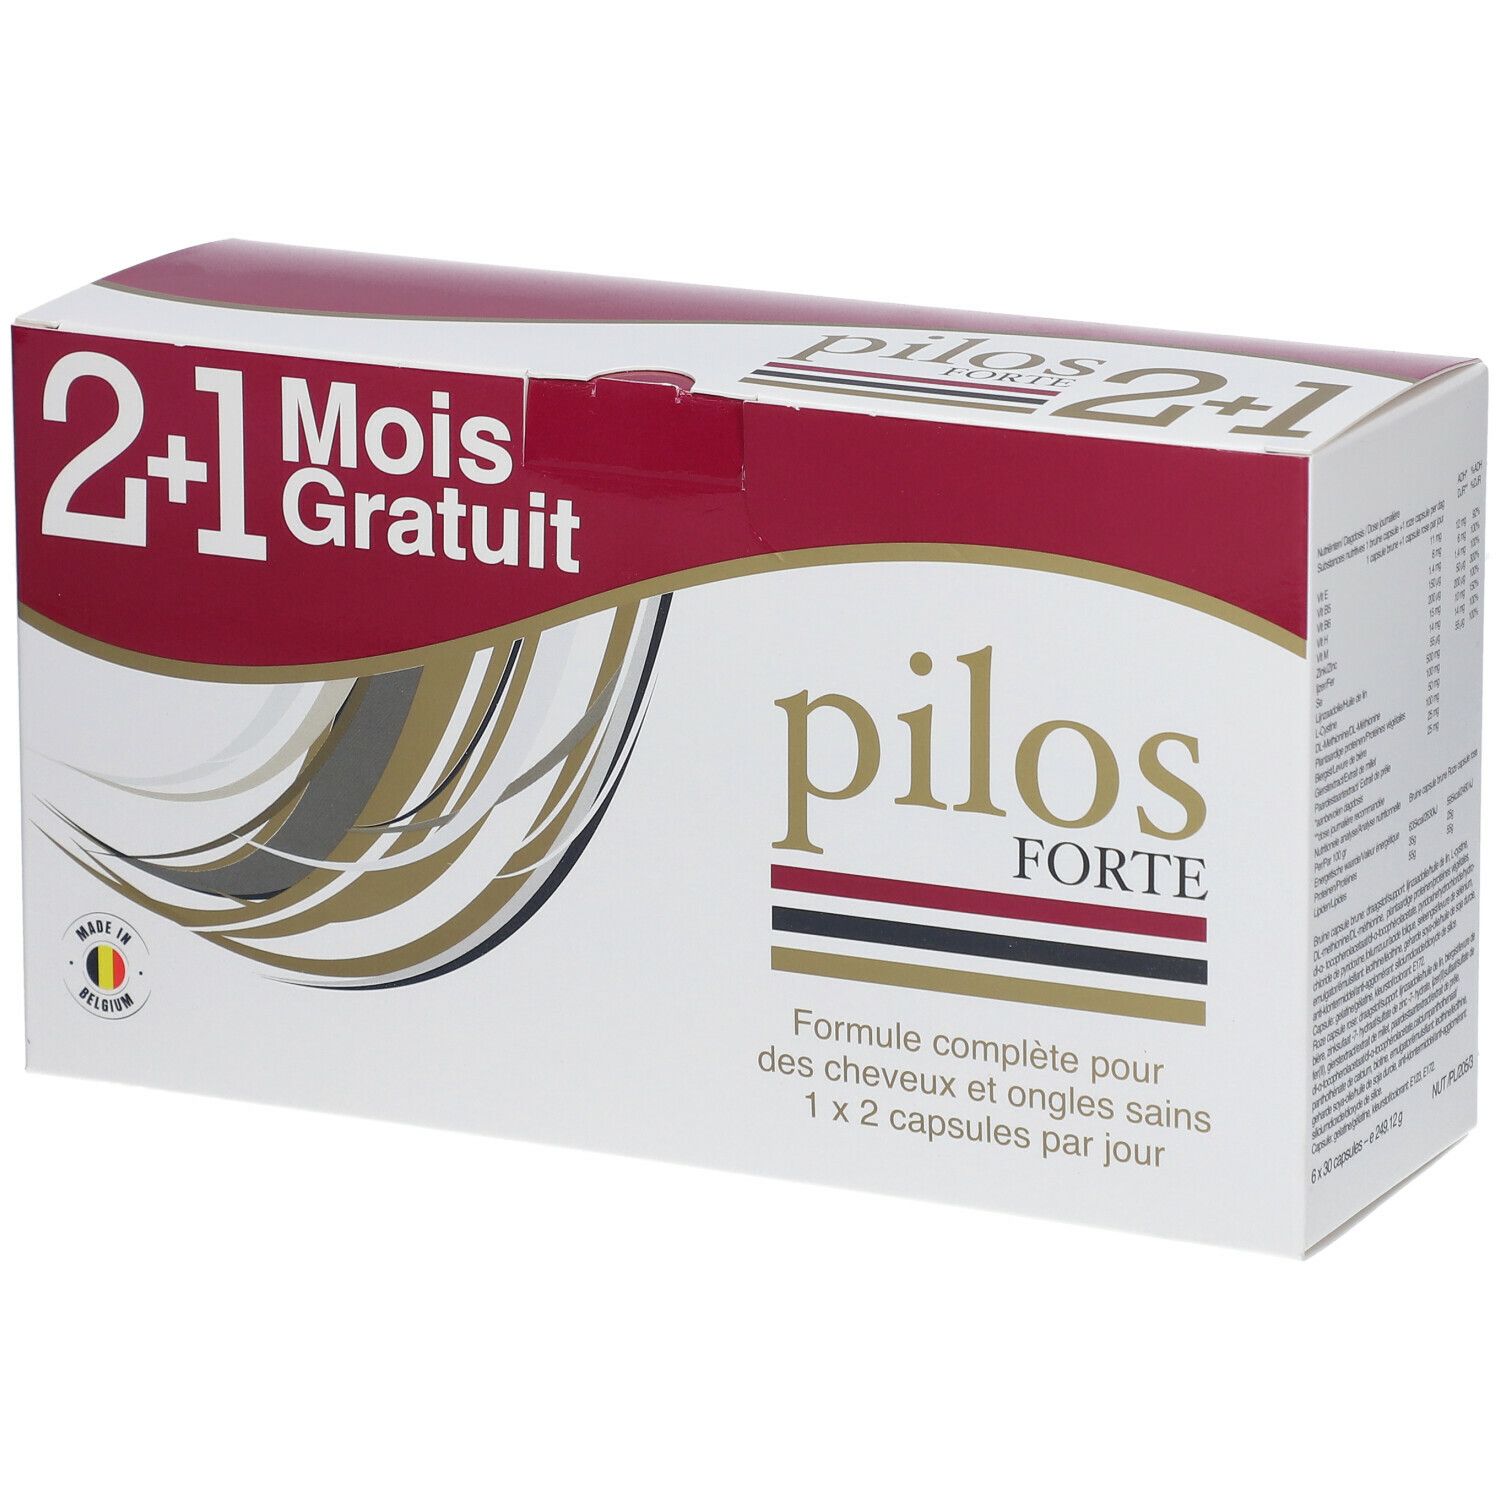 Pilos Forte 2+1 Month For FREE